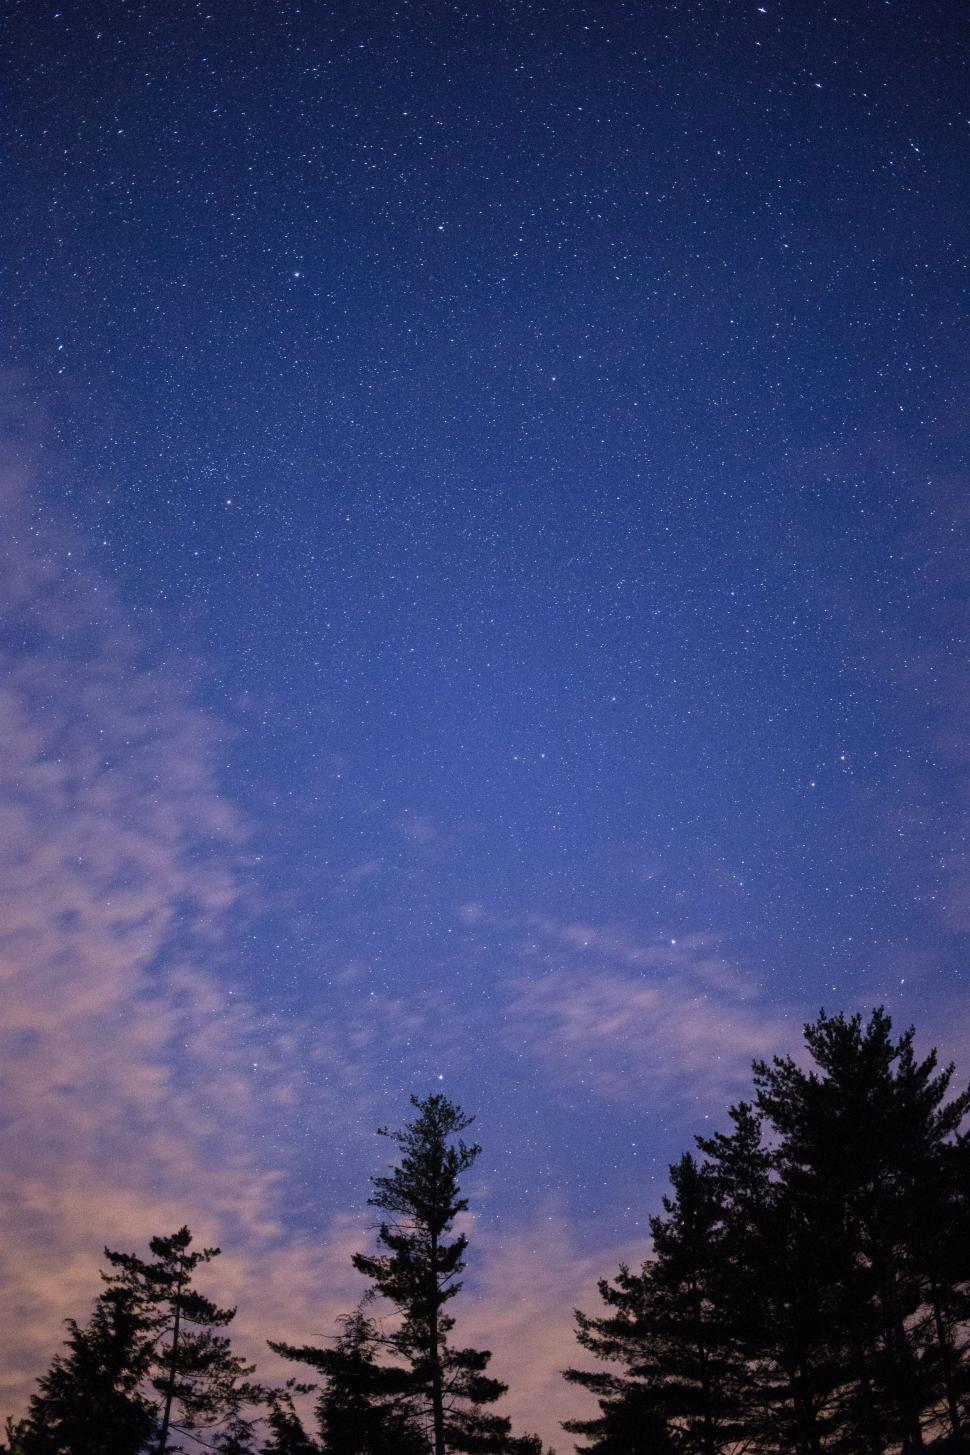 Free Image of Trees and Starry Sky  